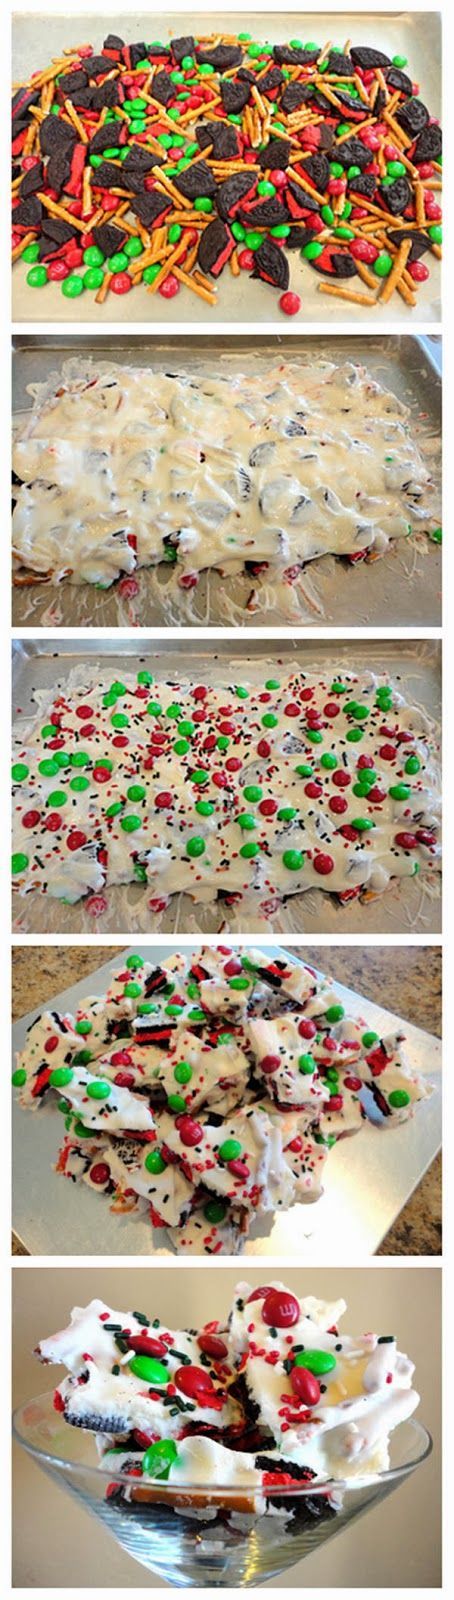 This Christmas Candy will be a hit at all your parties! Send it to school with the